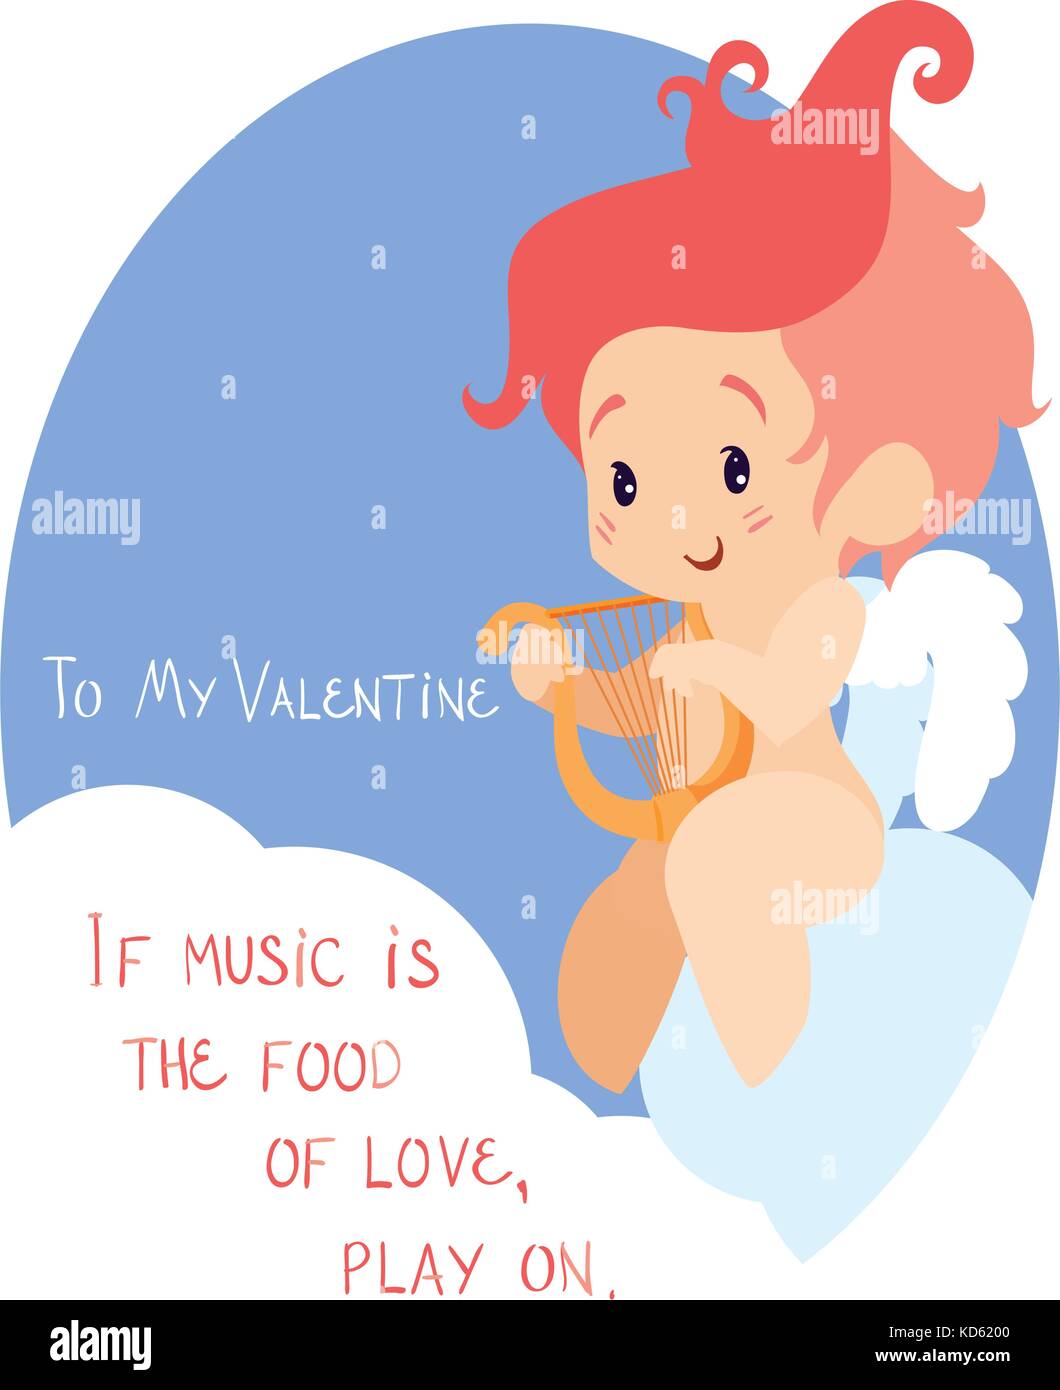 Cupid playing love song music on hurp. Handwritten fun quotation Valentines Day message Stock Vector